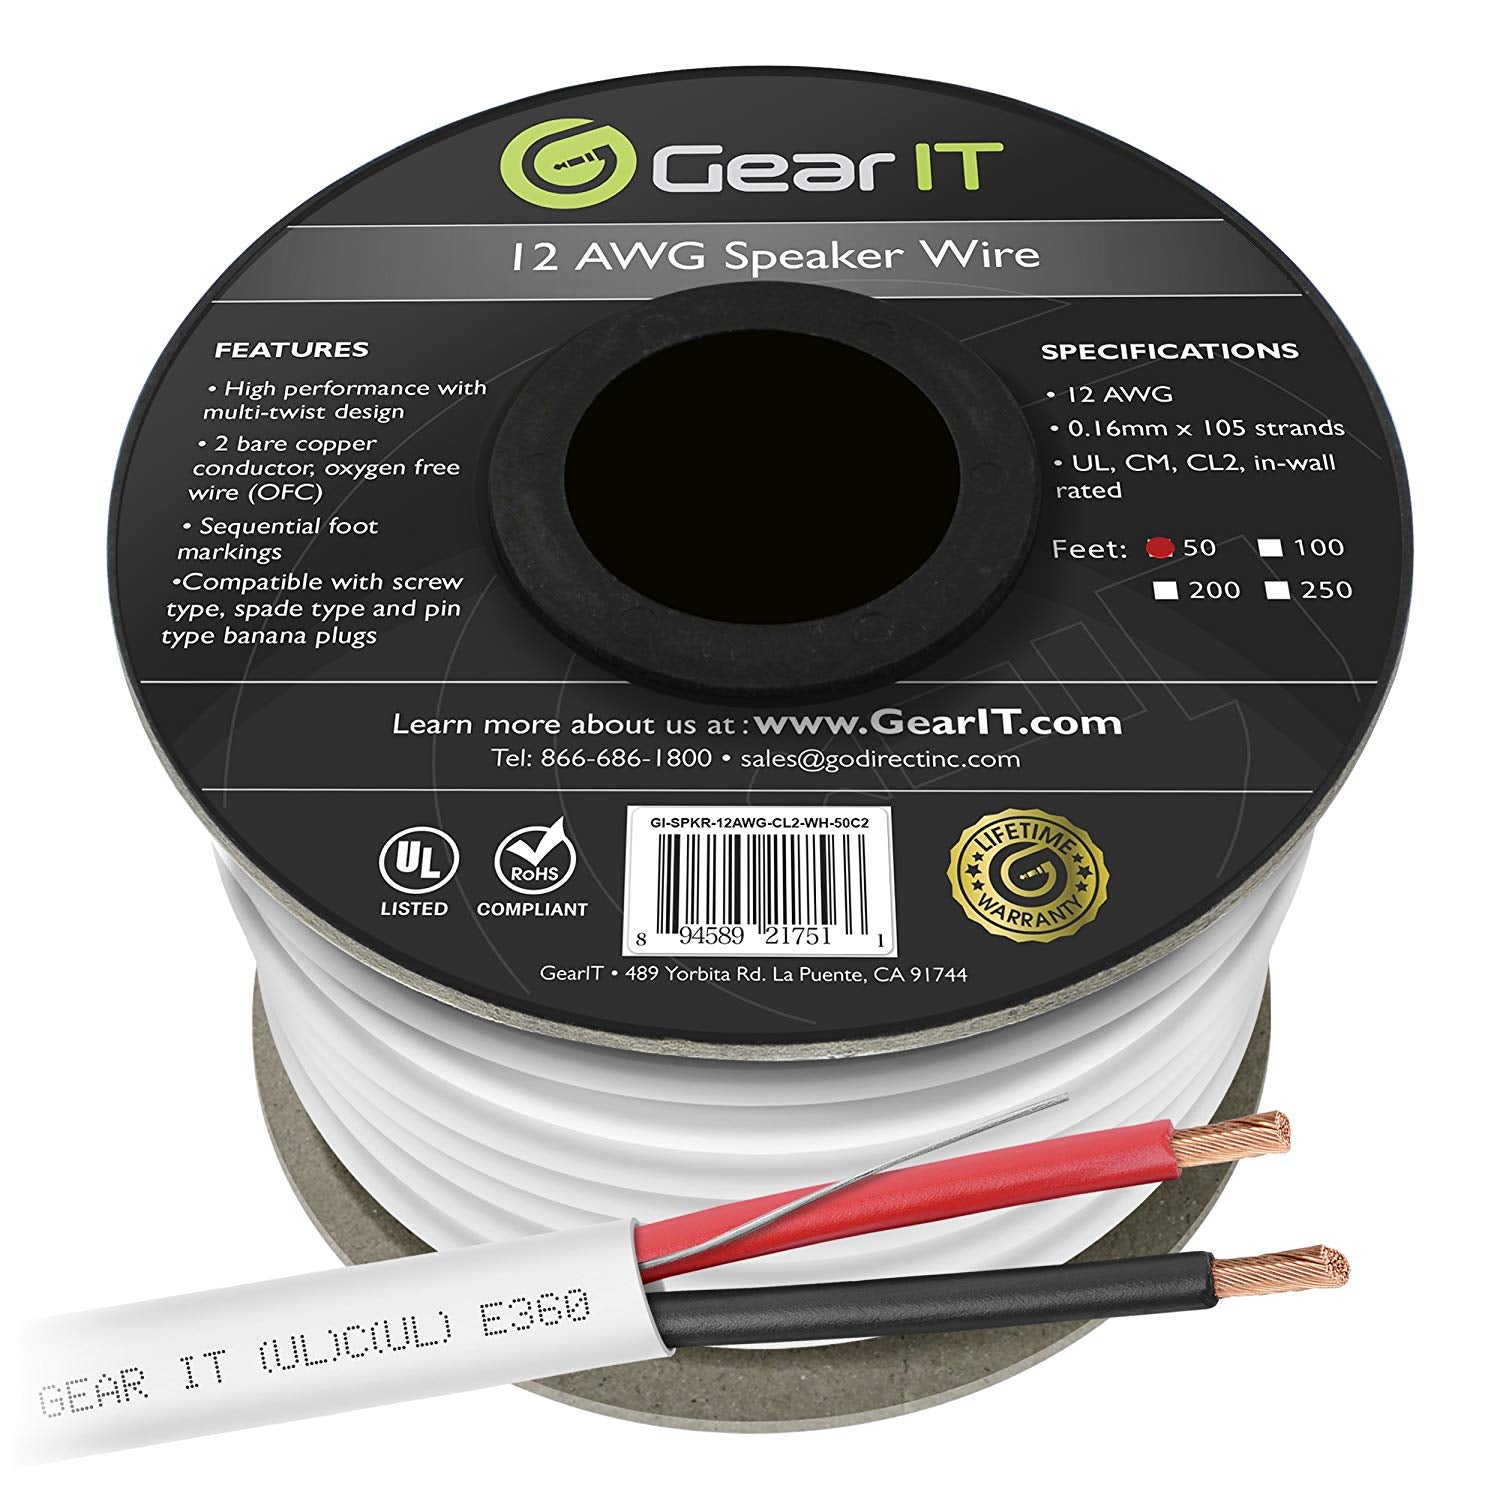 GearIT 14/2 Speaker Wire (250 Feet) 14AWG Gauge - Outdoor Direct Burial in  Ground/in Wall / CL3 CL2 Rated / 2 Conductors - OFC Oxygen-Free Copper